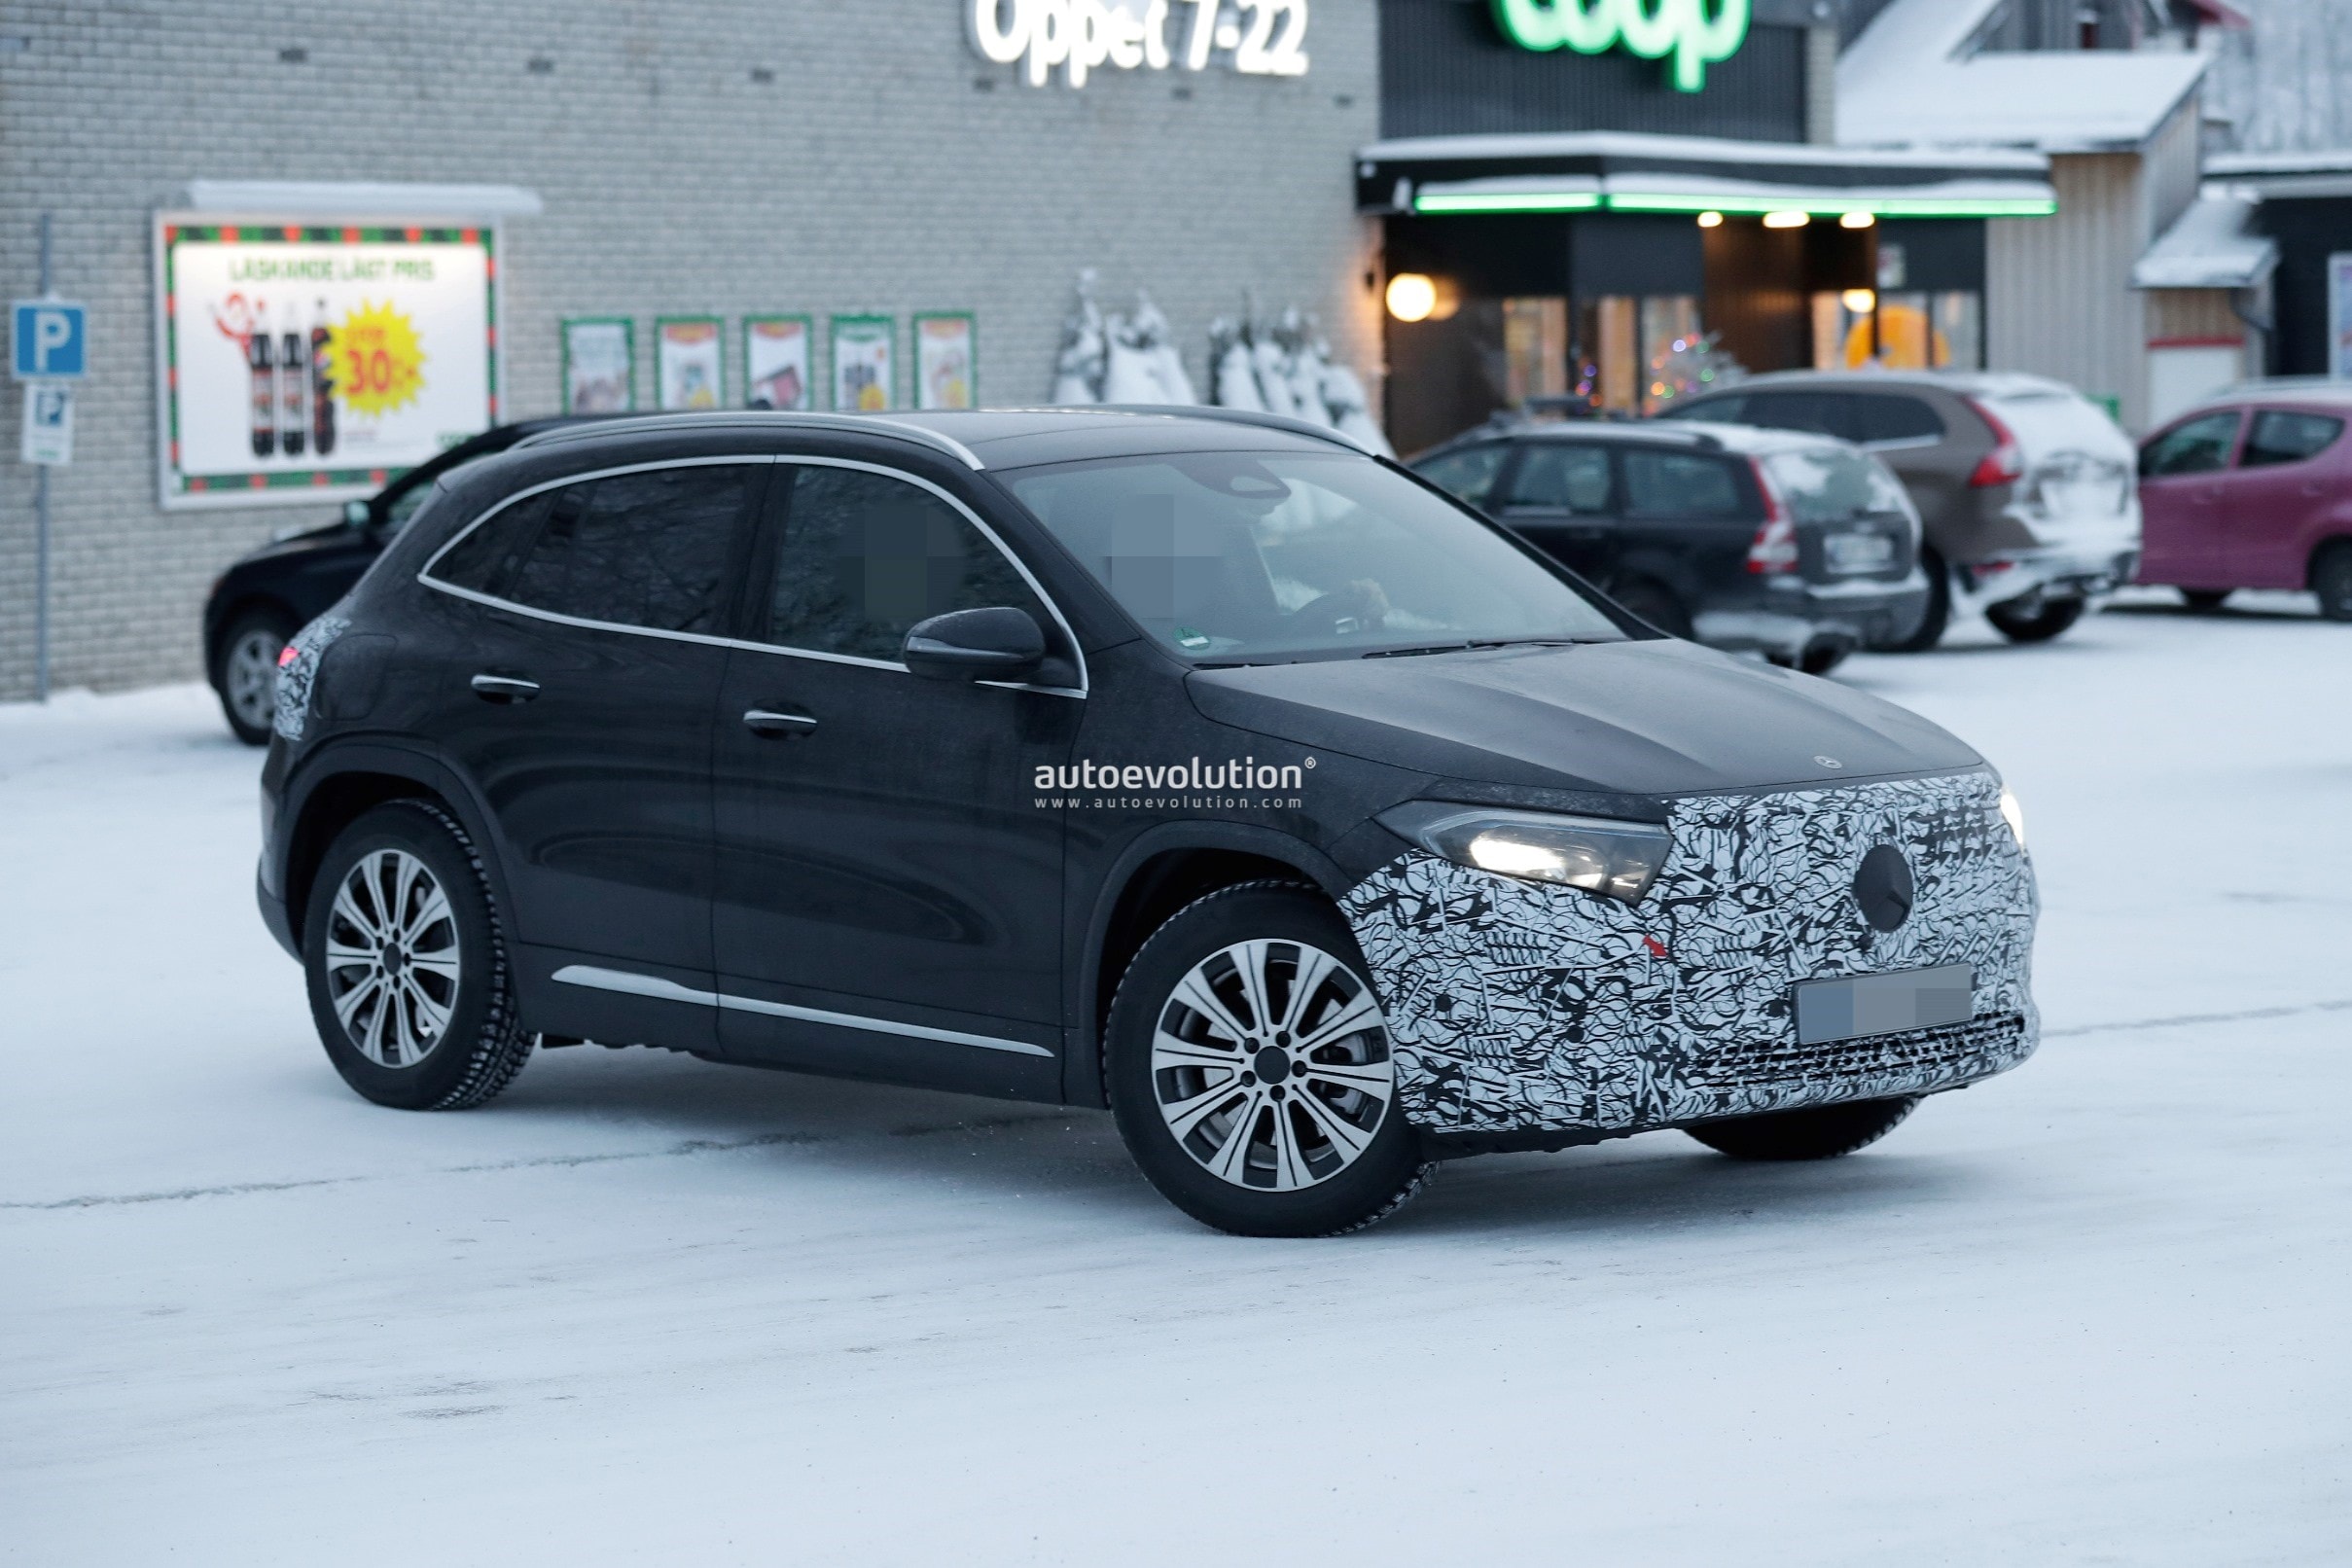 https://s1.cdn.autoevolution.com/images/news/mercedes-benz-eqa-facelift-shows-revised-front-and-rear-ends-in-new-spy-photos-208045_1.jpg